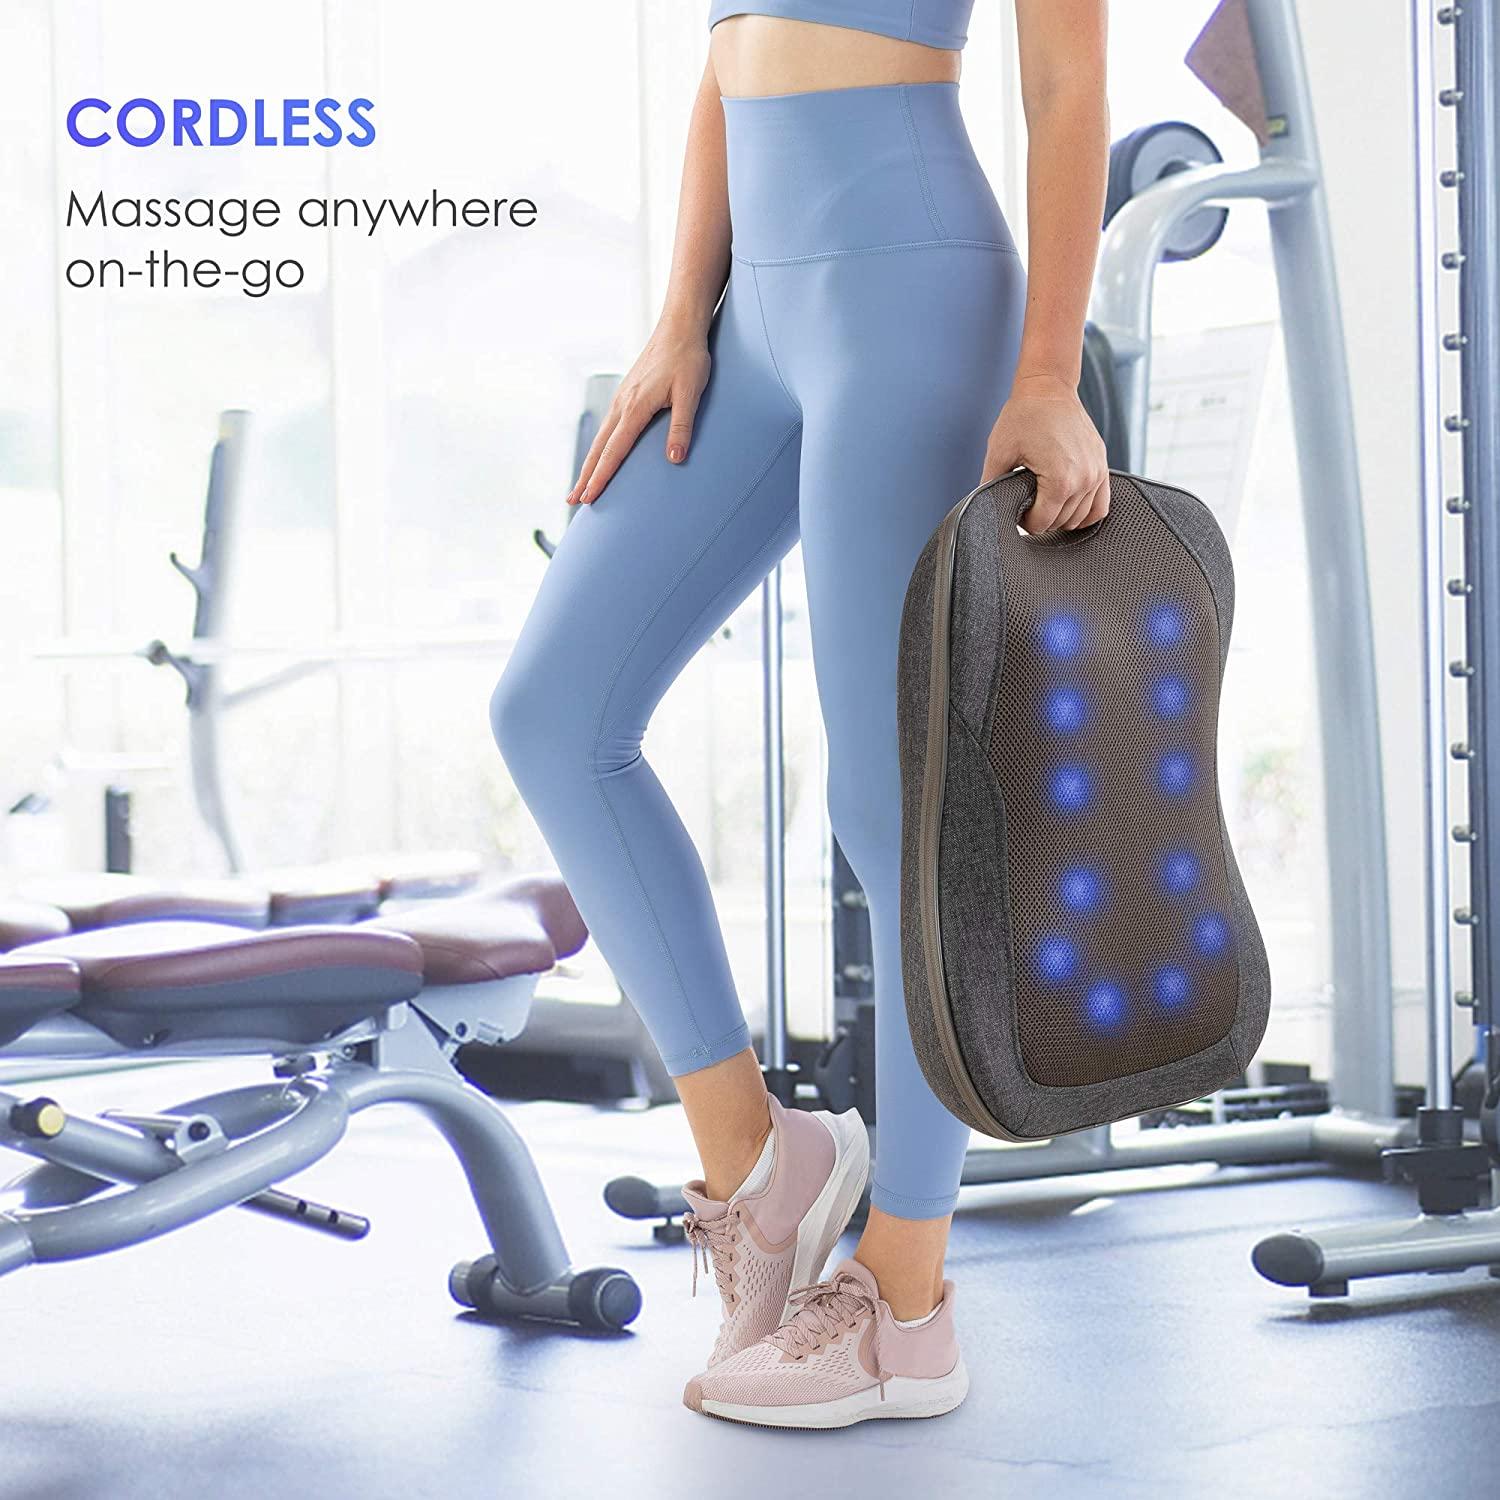 Comfier Cordless Back Massager with Heat - Rechargeable Chair Massager,  Shiatsu Massage Chair Pad with Adjustable Intensity,Portable Massage  Cushion, Ideal Gifts for Men/Women Cordless Dark Gray